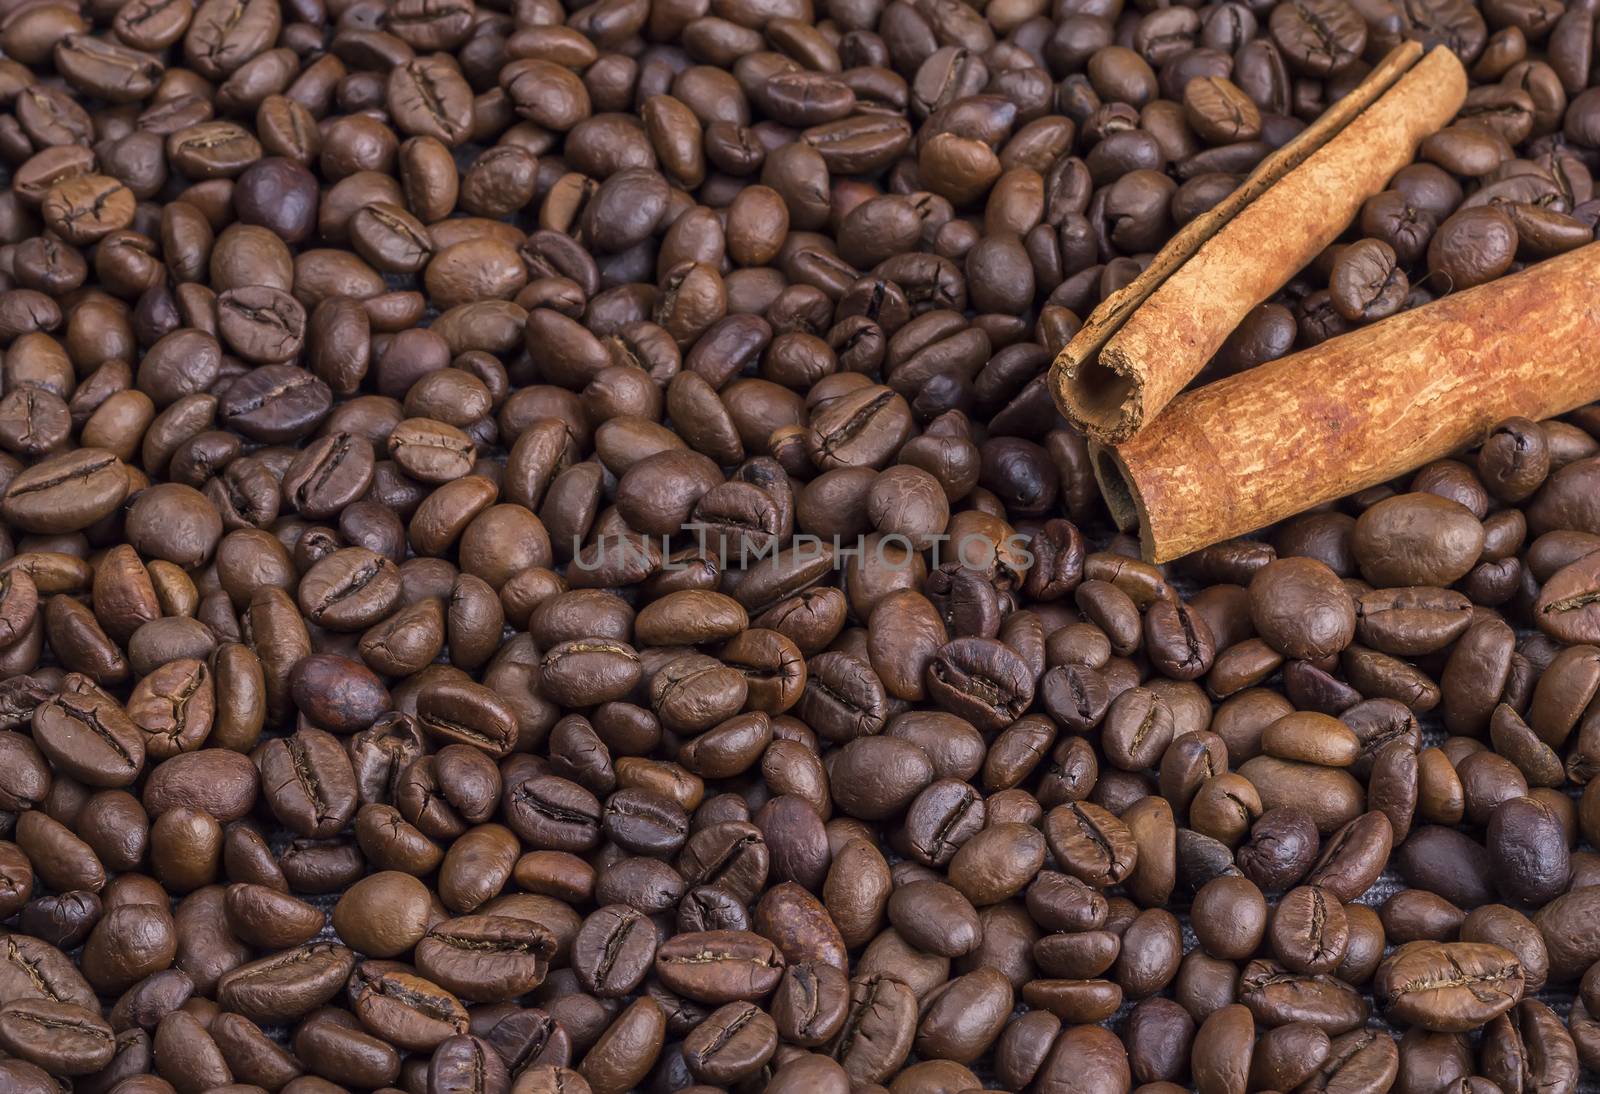 Cinnamon on the coffee beans. A lot of coffee beans background.